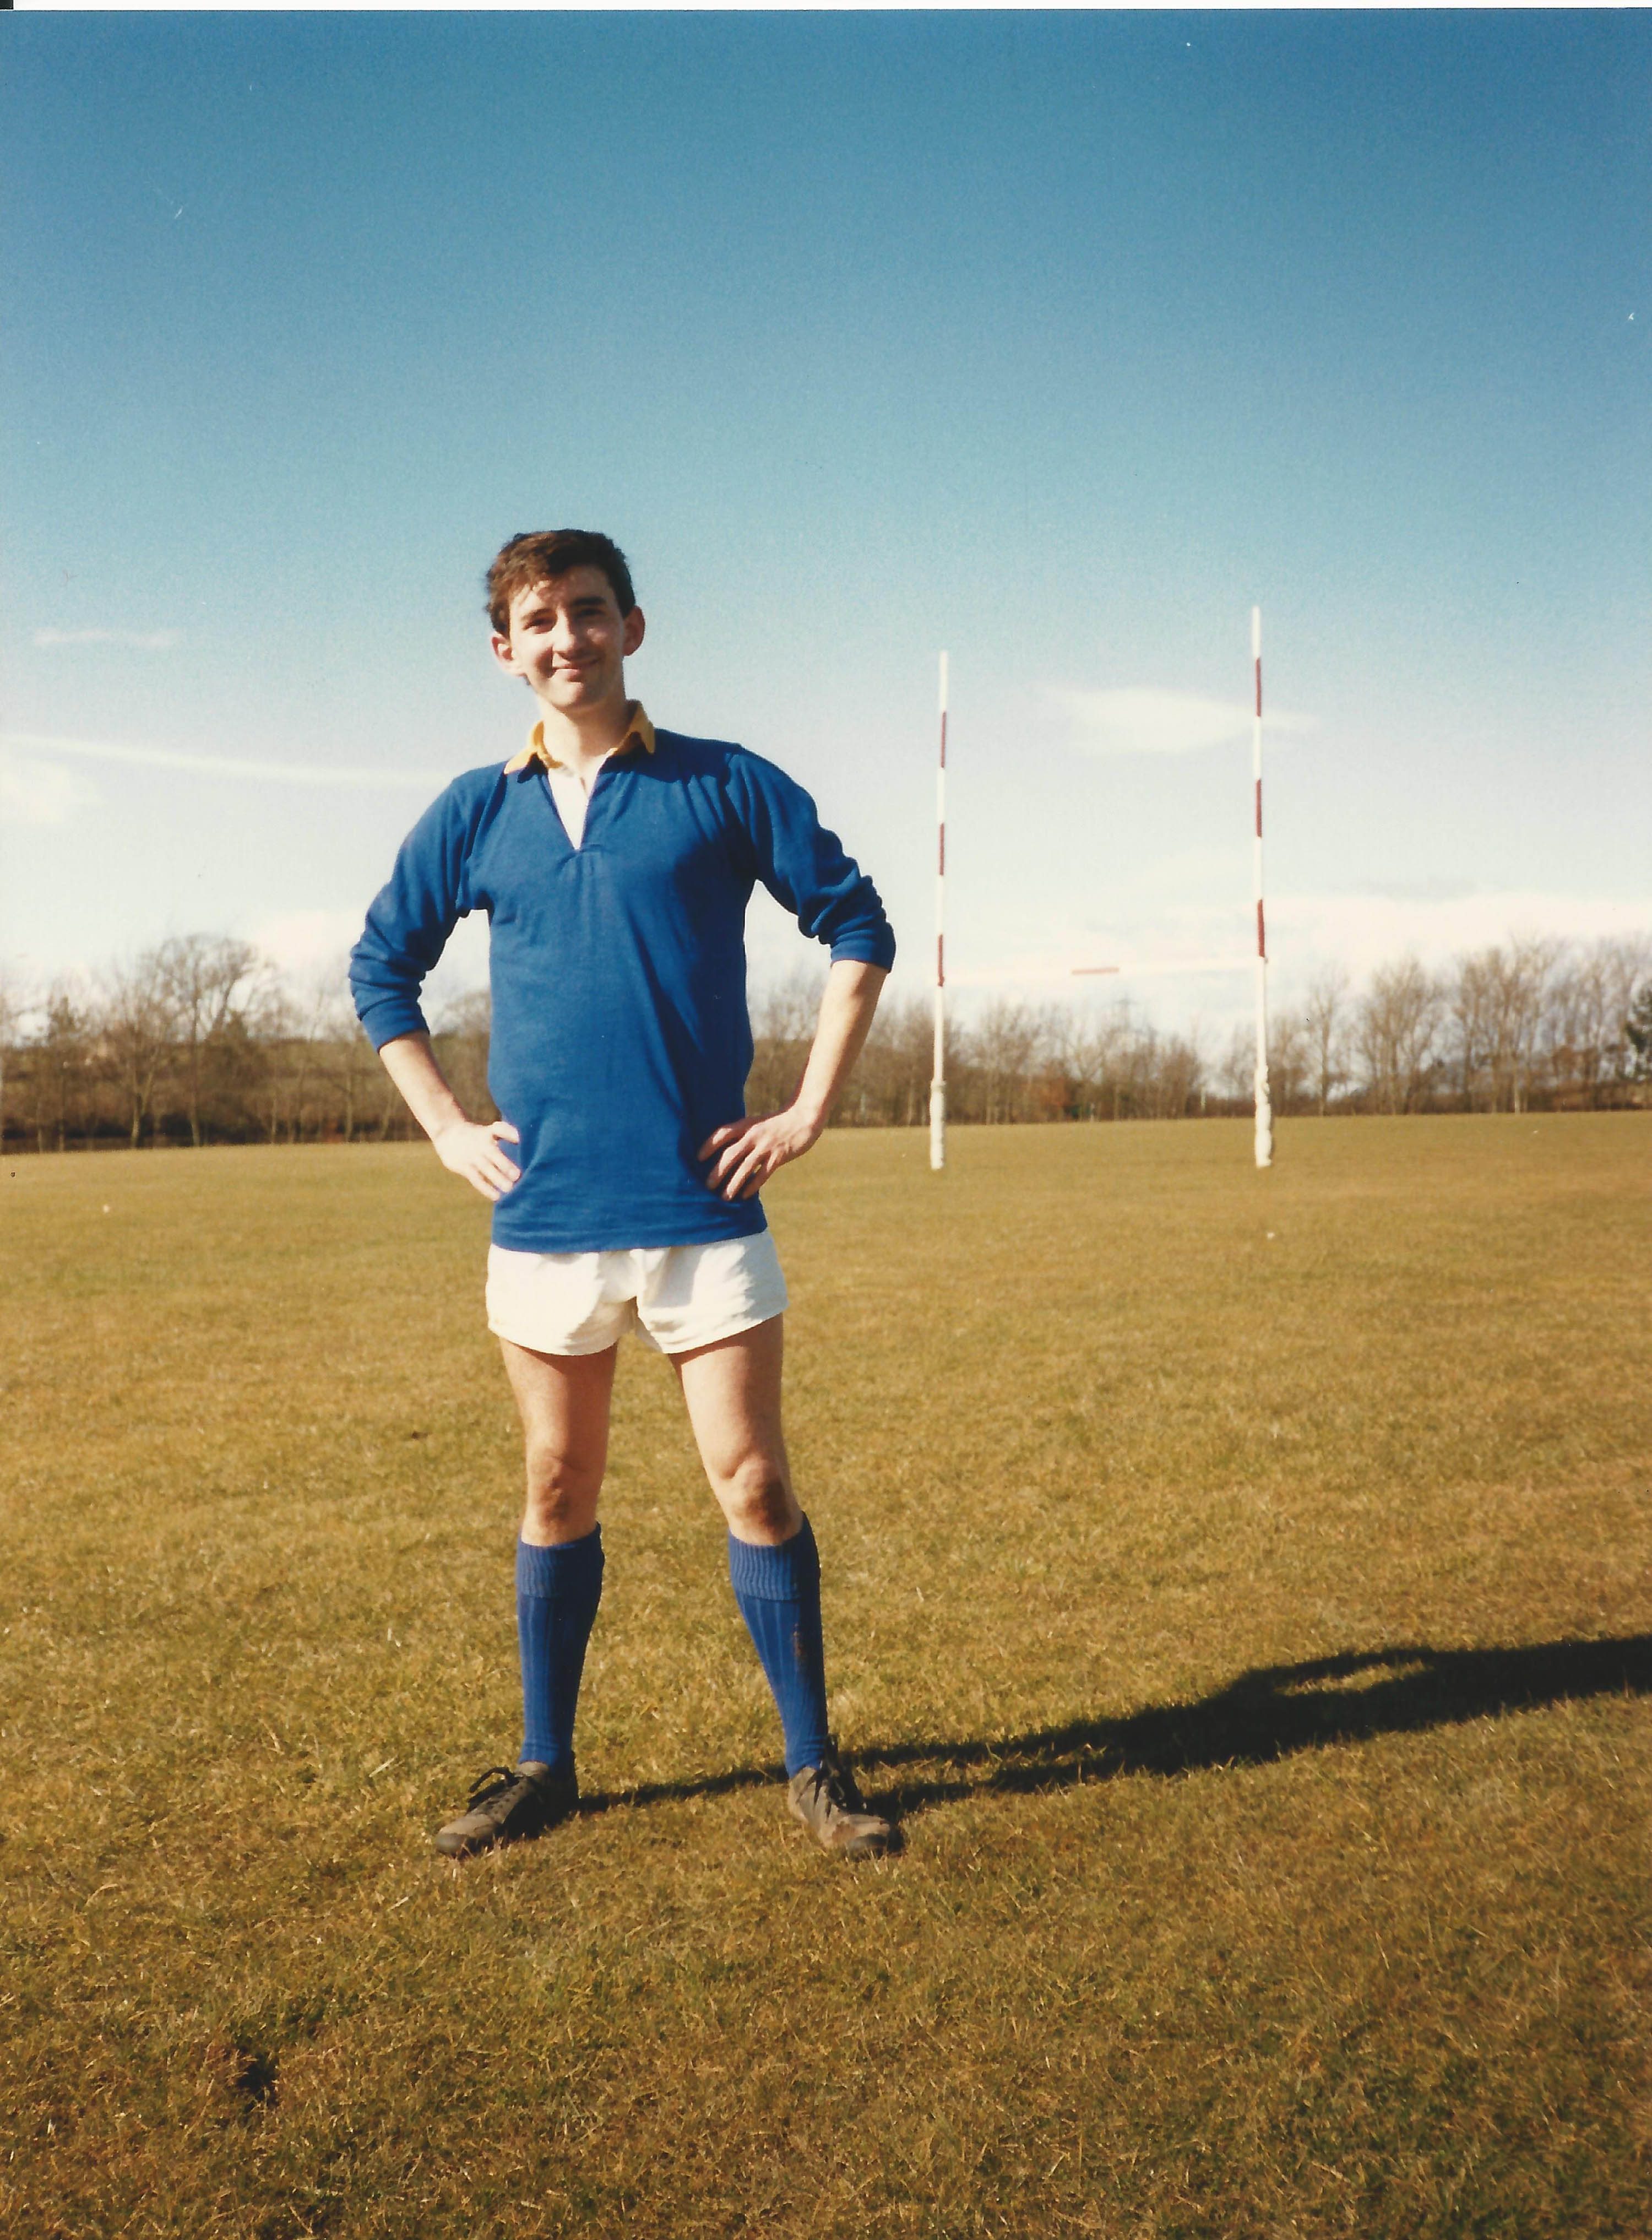 Rugby player posing on the field in a blue jersey